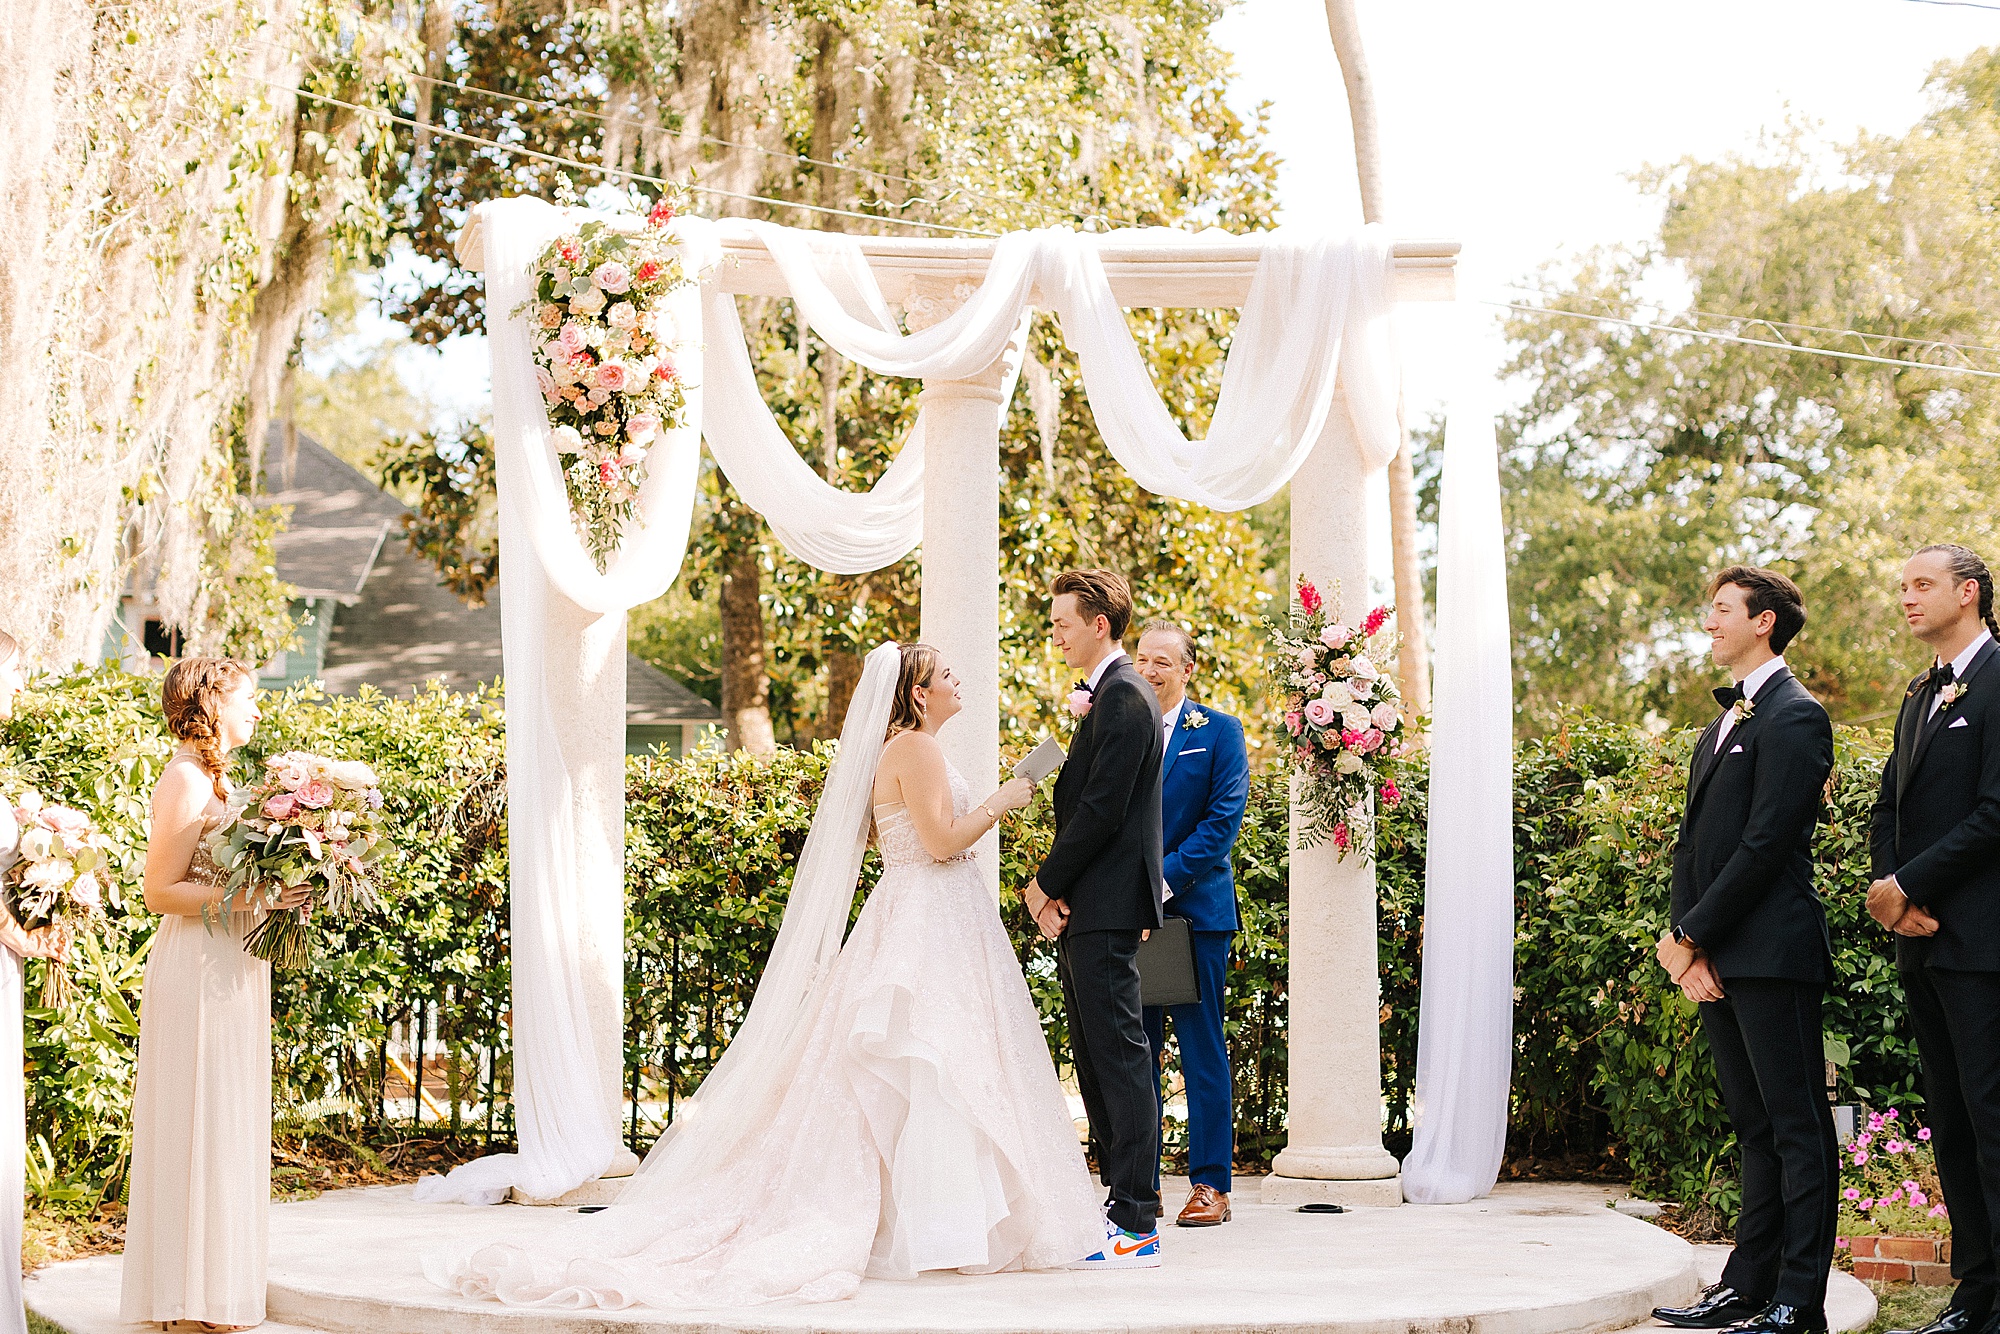 newlyweds exchange vows during outdoor wedding ceremony in Florida